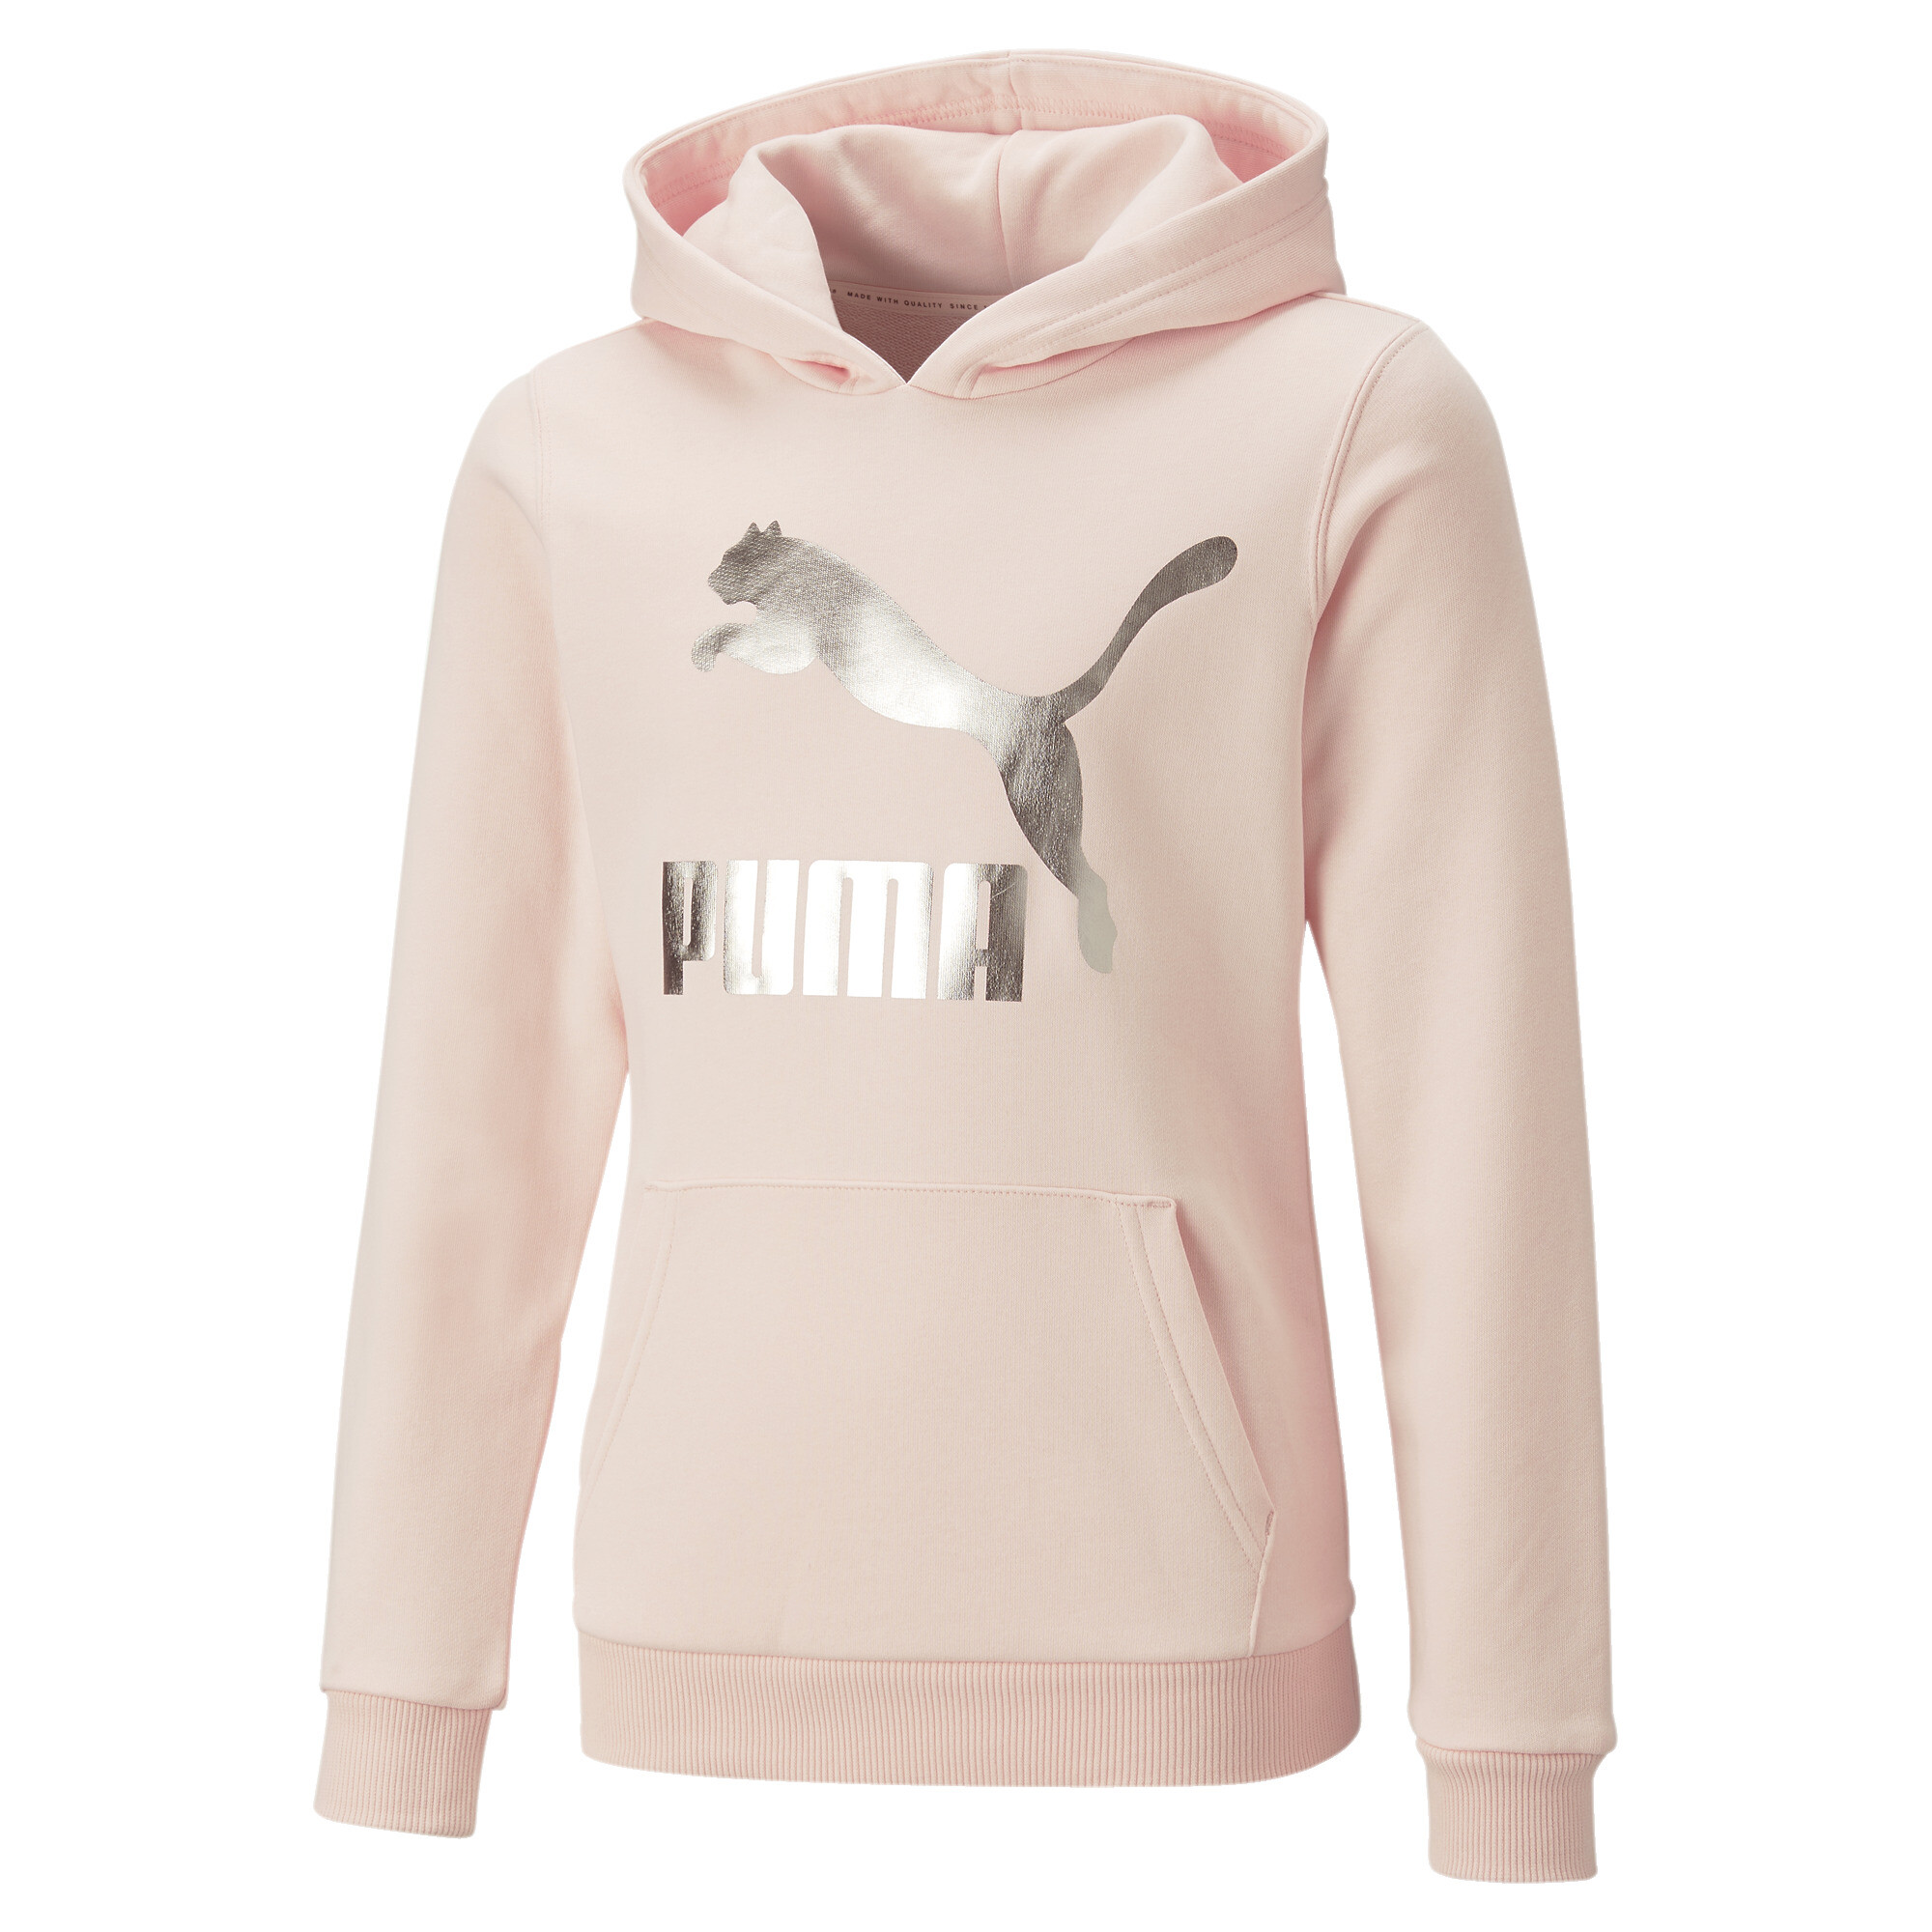 PUMA Classics Logo Hoodie In 70 - Pink, Size 7-8 Youth